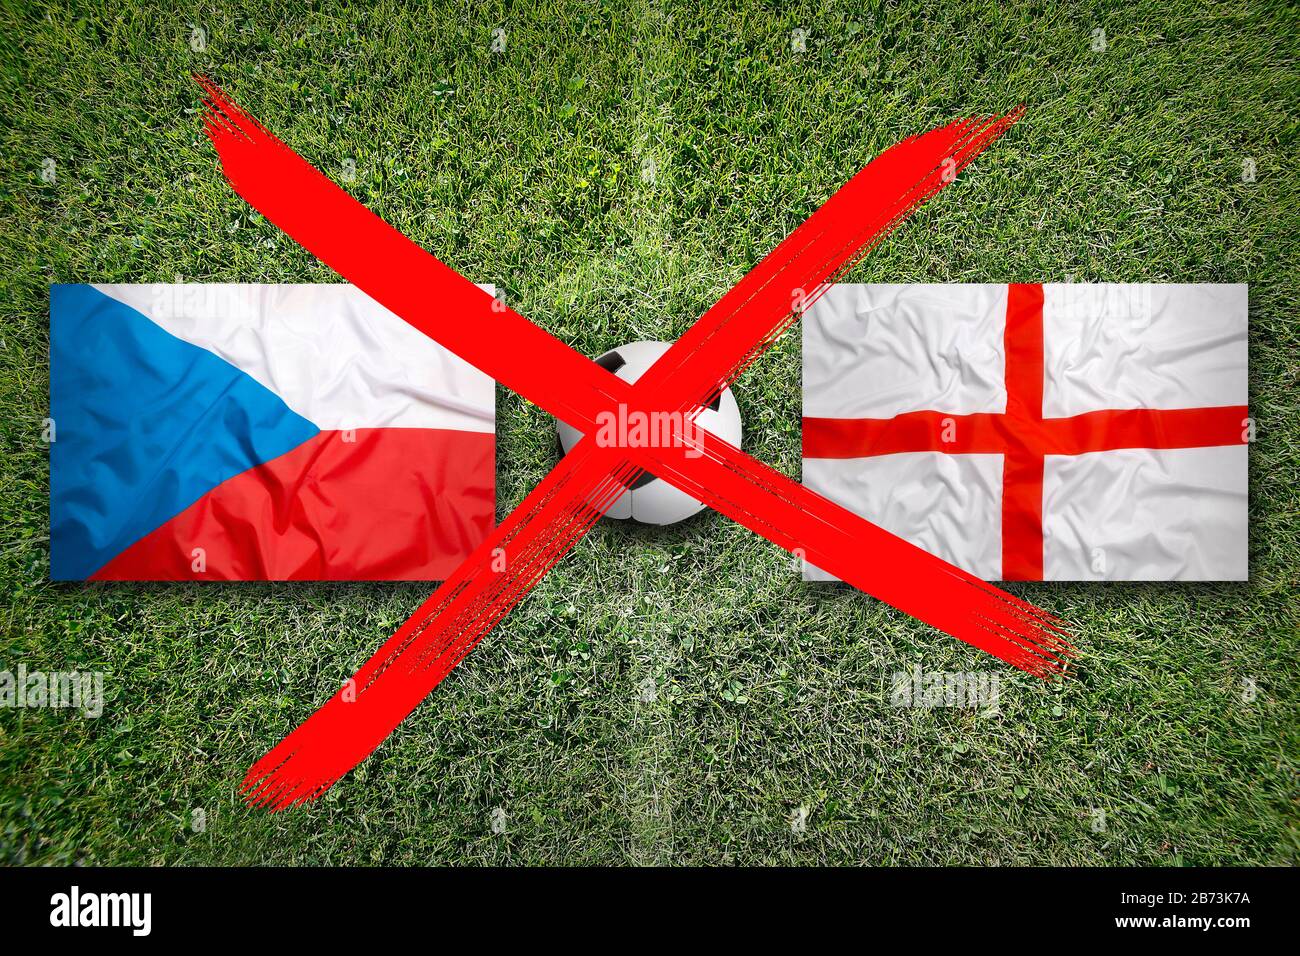 Canceled soccer game, Czech Republic vs. England flags on green soccer field Stock Photo